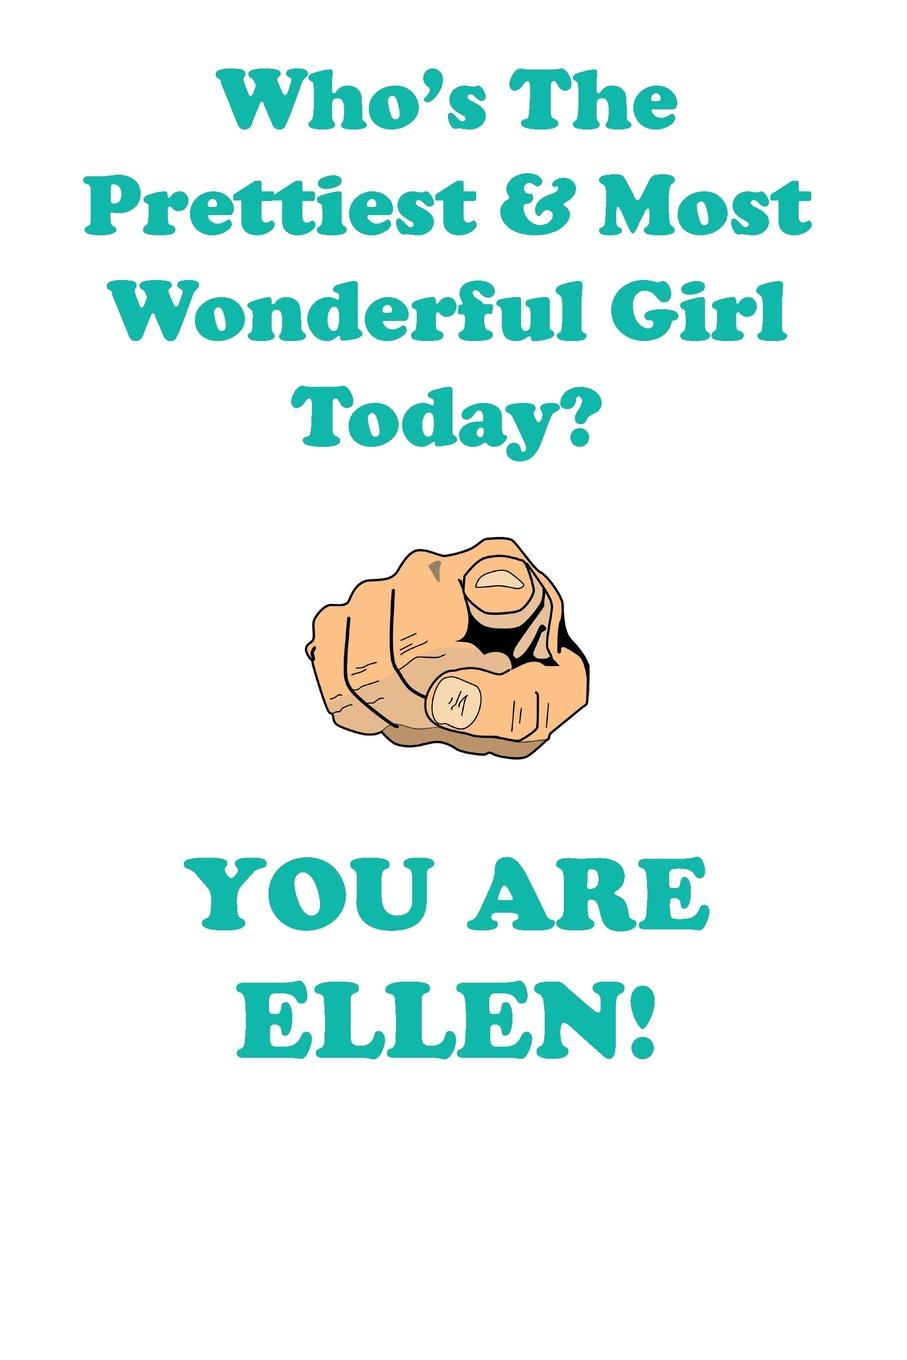 ELLEN is The Prettiest Affirmations Workbook Positive Affirmations Workbook Includes. Mentoring Questions, Guidance, Supporting You